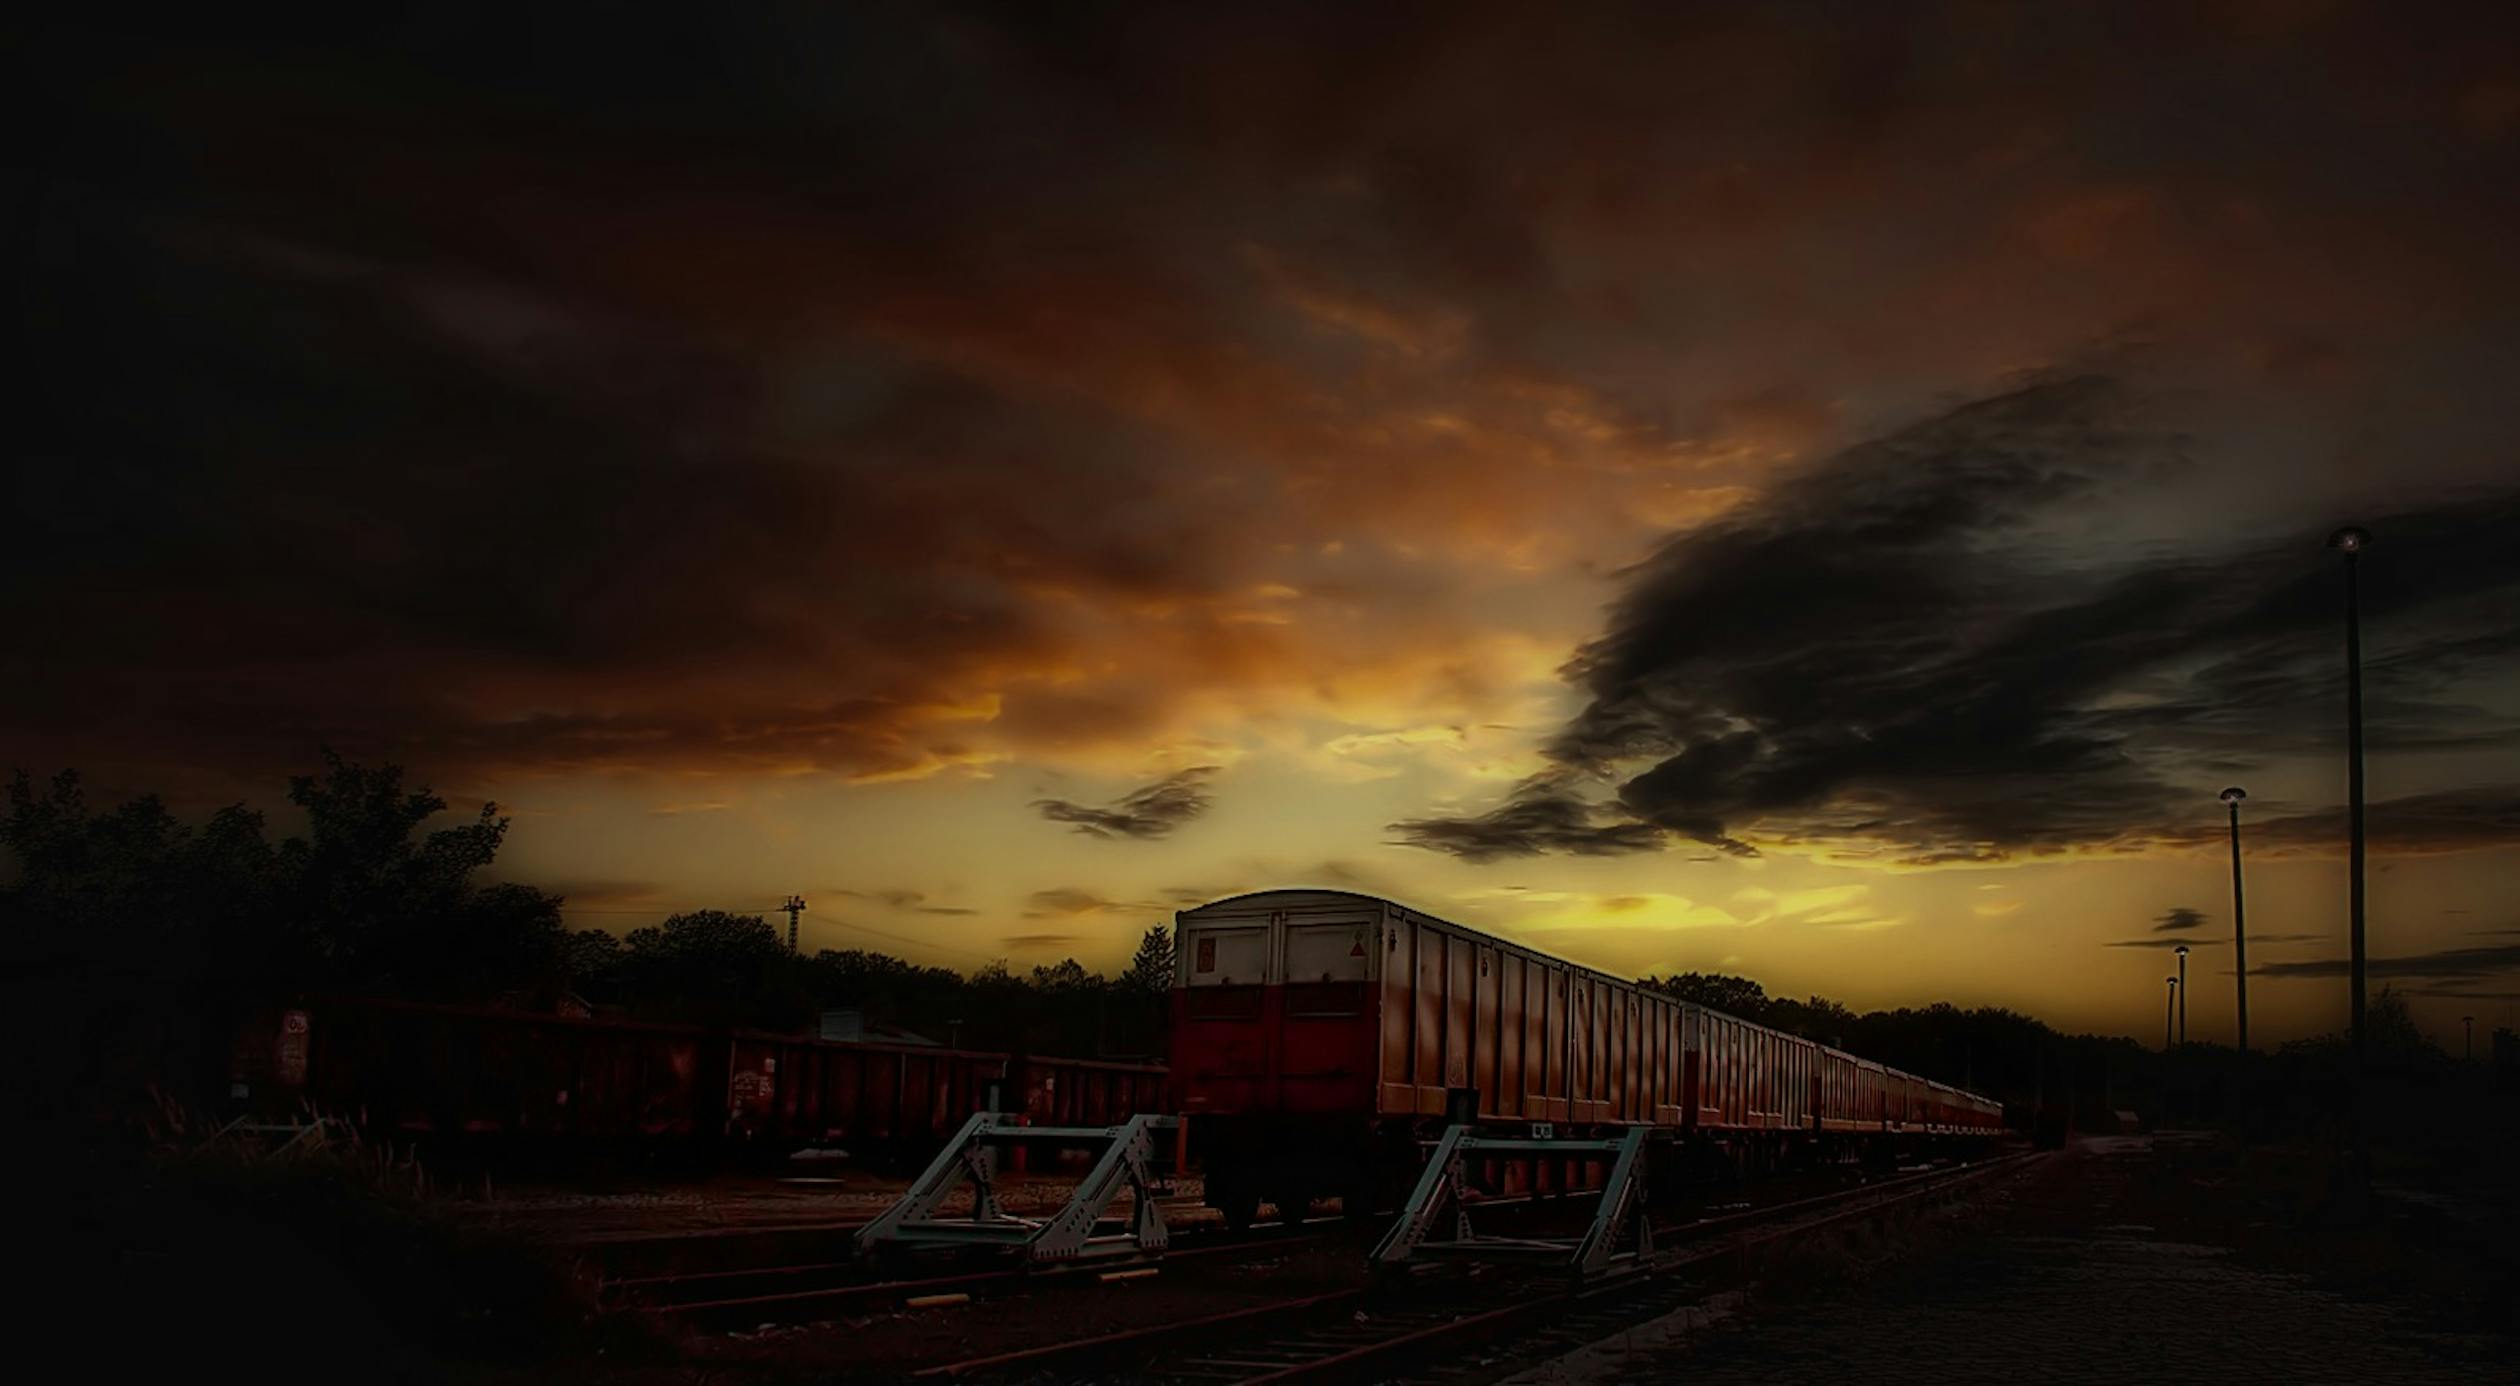 Red and White Train Taken during Sunset · Free Stock Photo